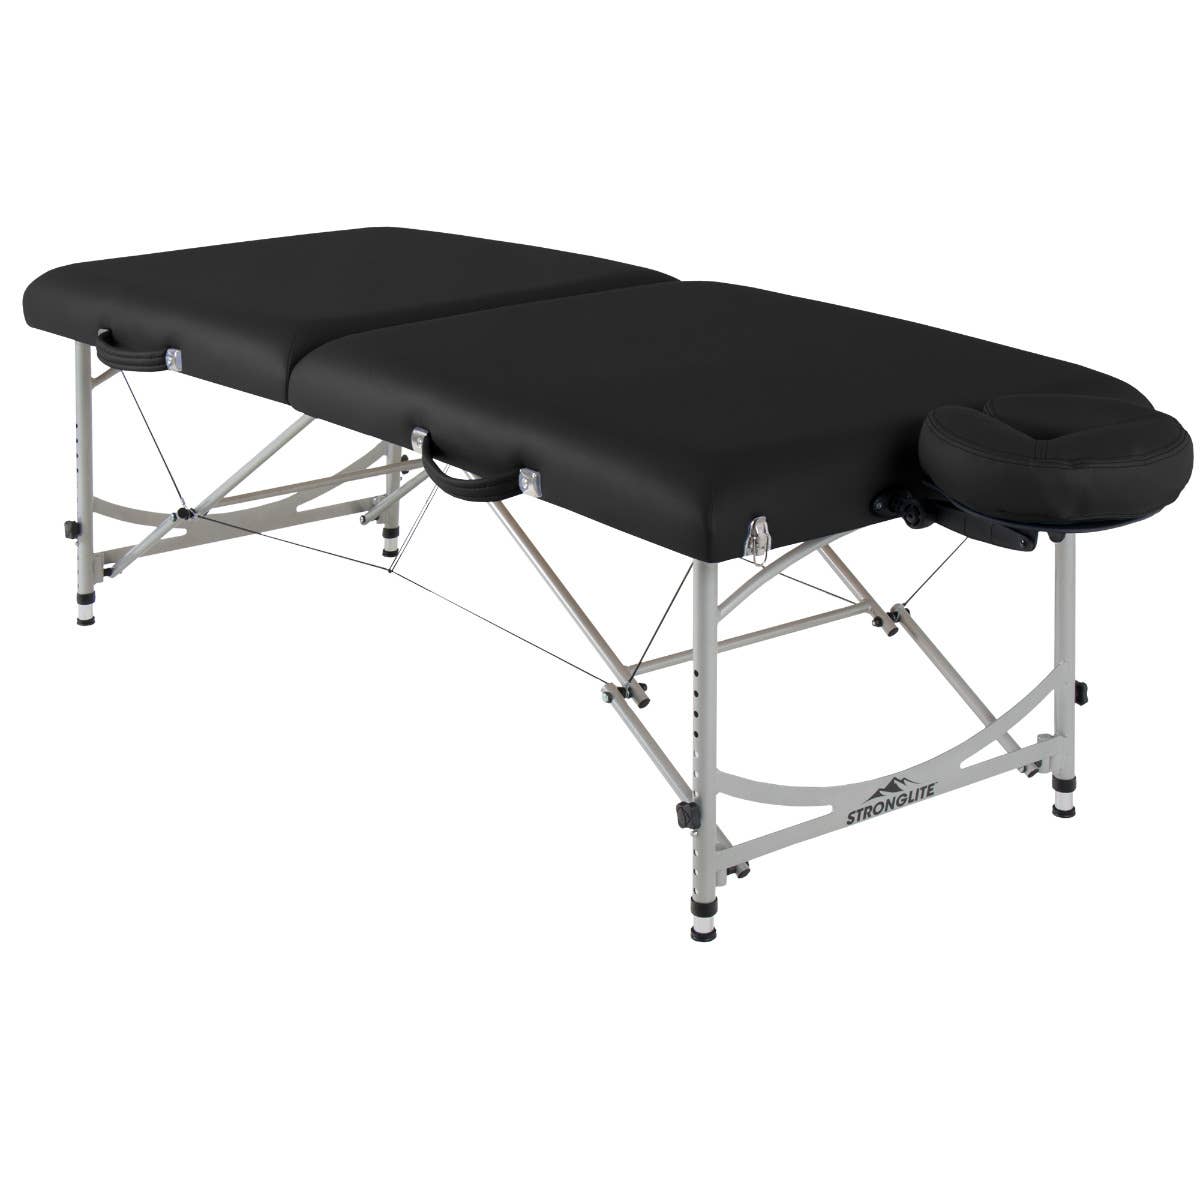 Versalite Pro massage table in black Natures Touch upholstery.